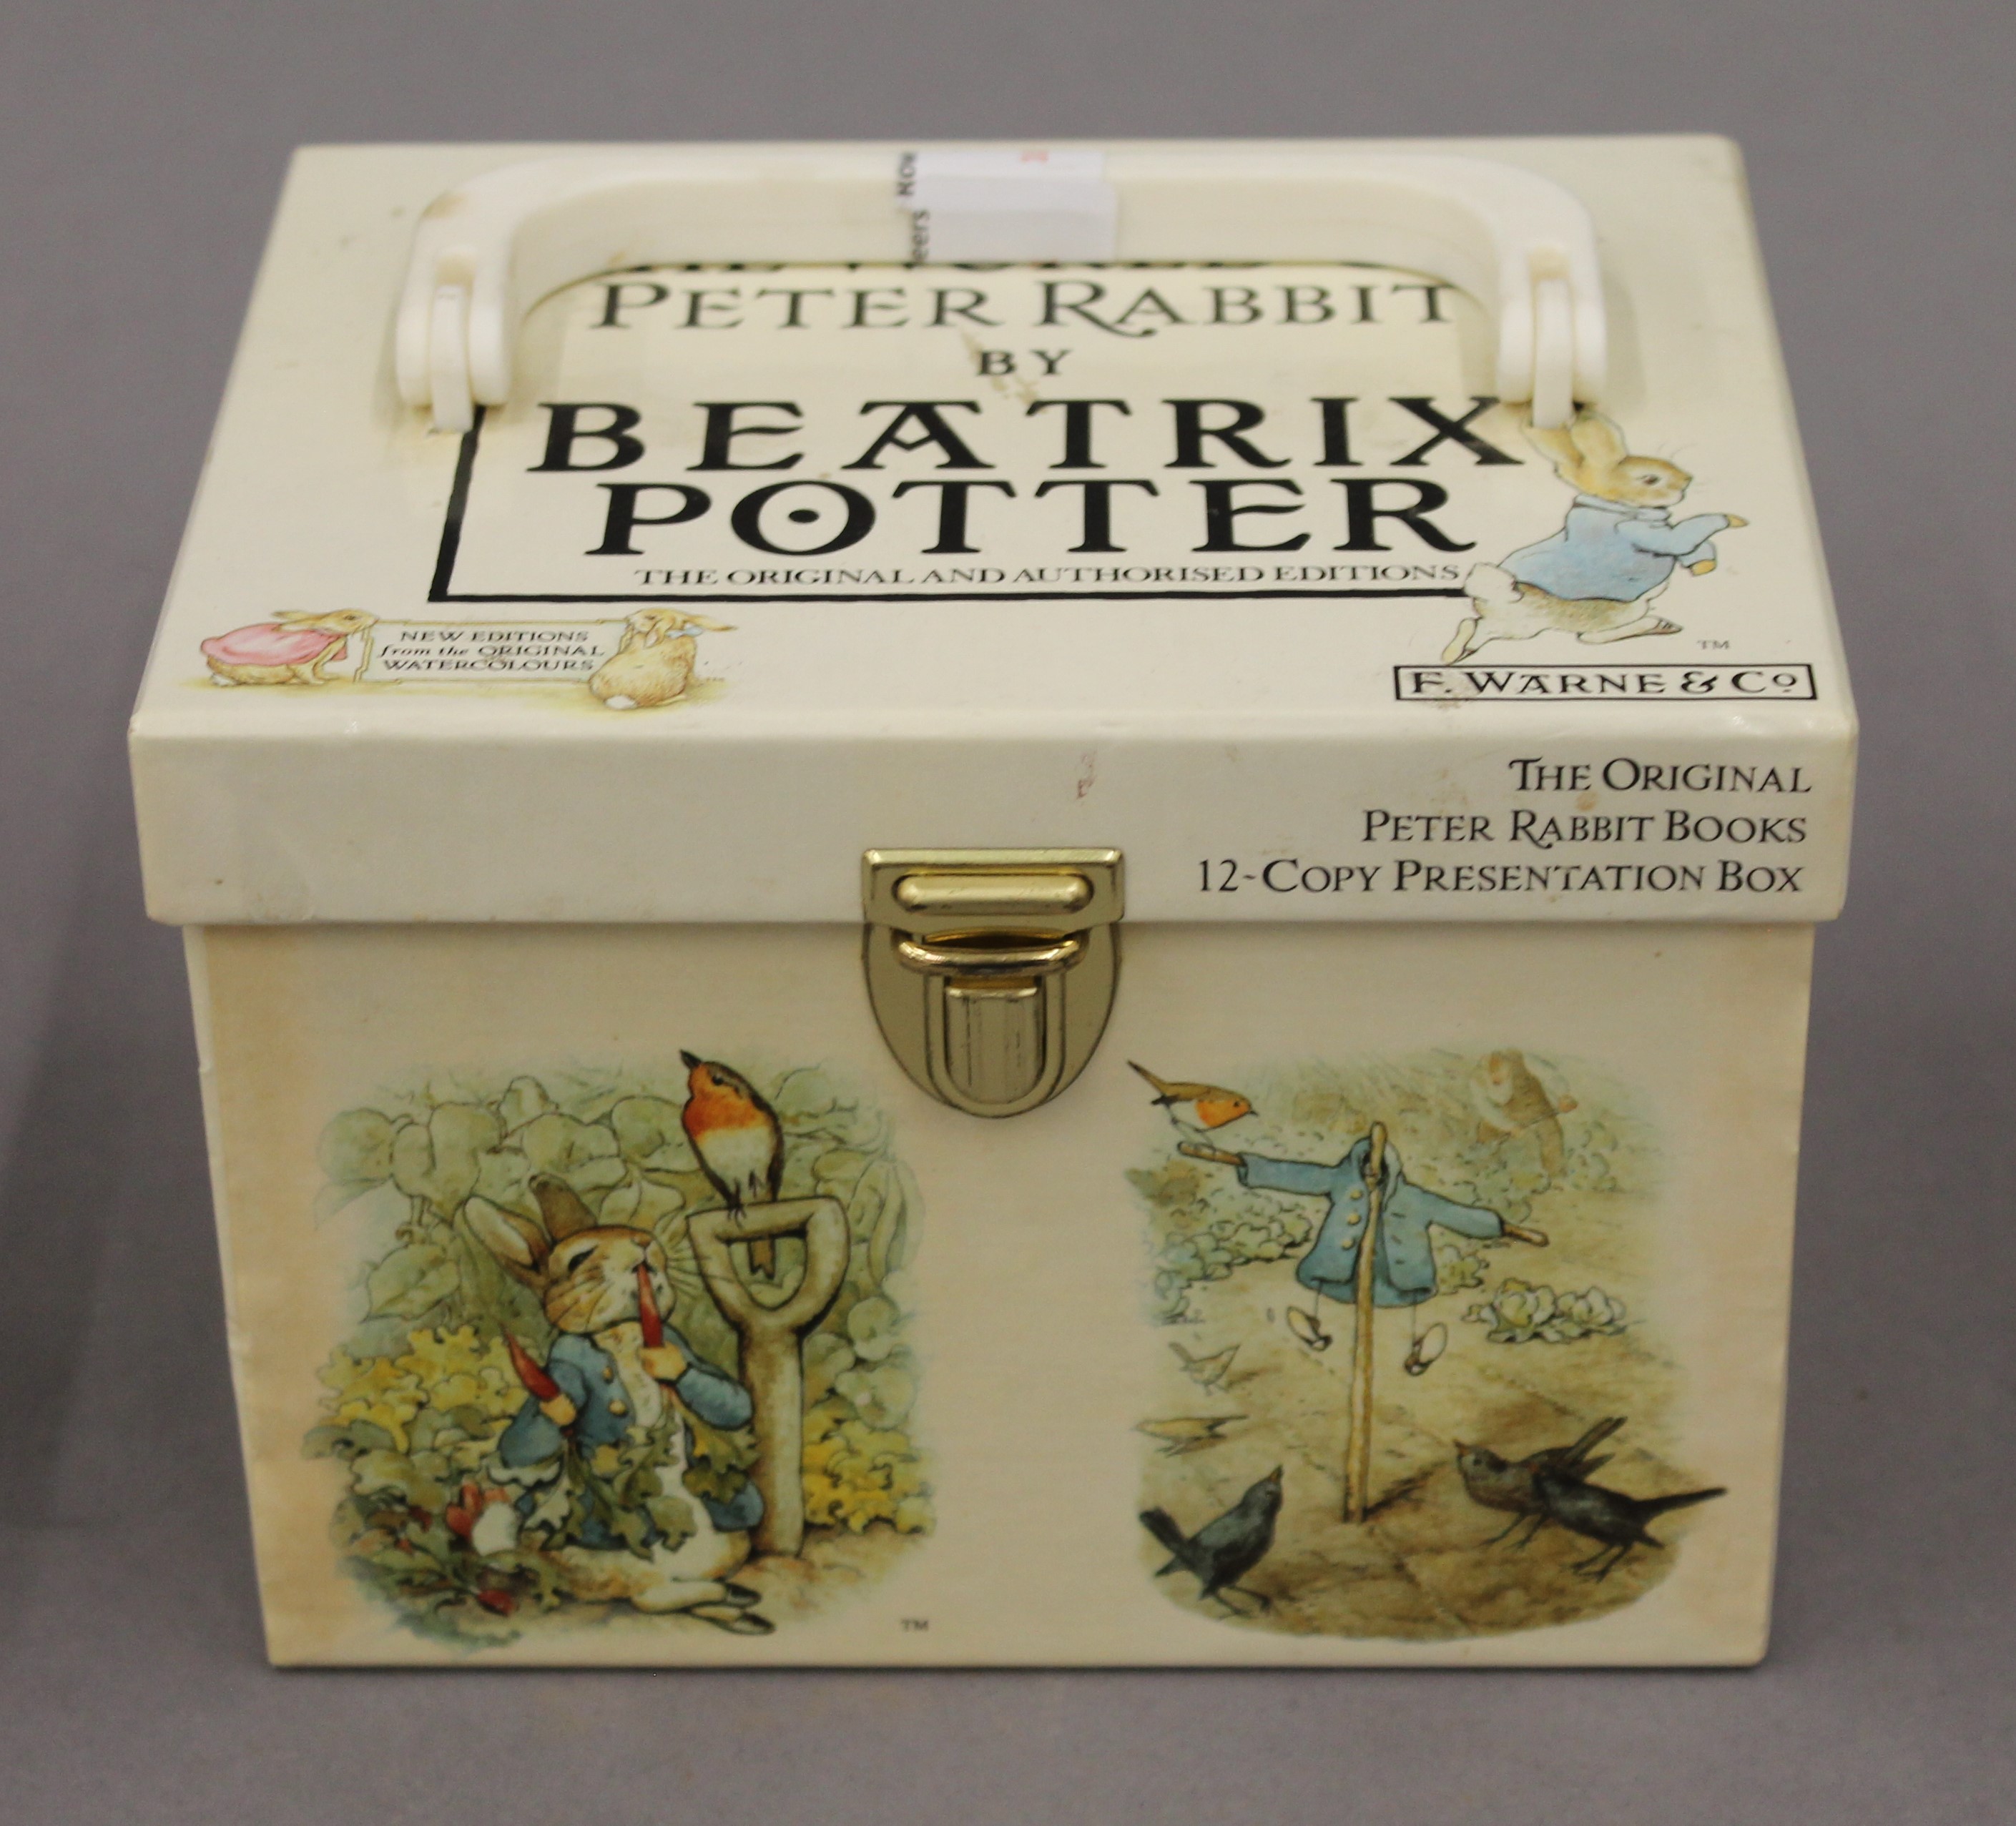 A quantity of vintage Beatrix Potter Peter Rabbit and My Library sets of children's books. - Image 2 of 4